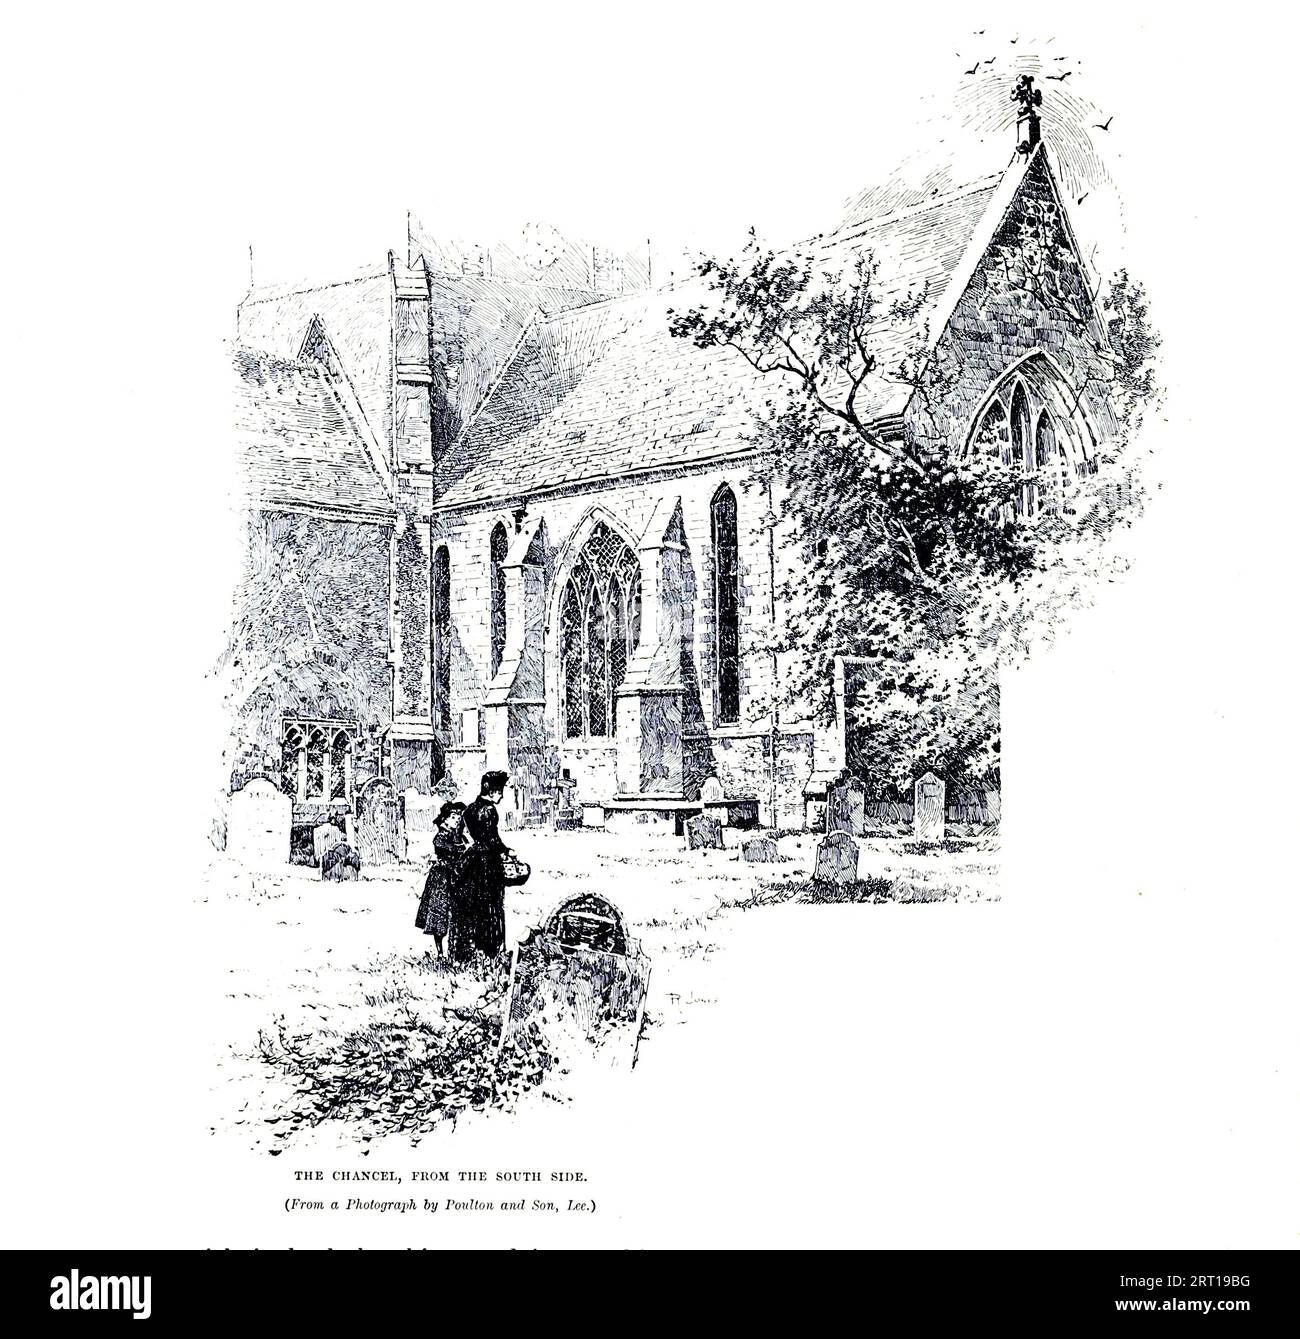 Amesbury the Chancel of the church Amesbury is a town and civil parish in Wiltshire, England. from the book ' Cathedrals, abbeys and churches of England and Wales : descriptive, historical, pictorial ' by Bonney, T. G. (Thomas George), 1833-1923; Publisher London : Cassell 1890 Stock Photo